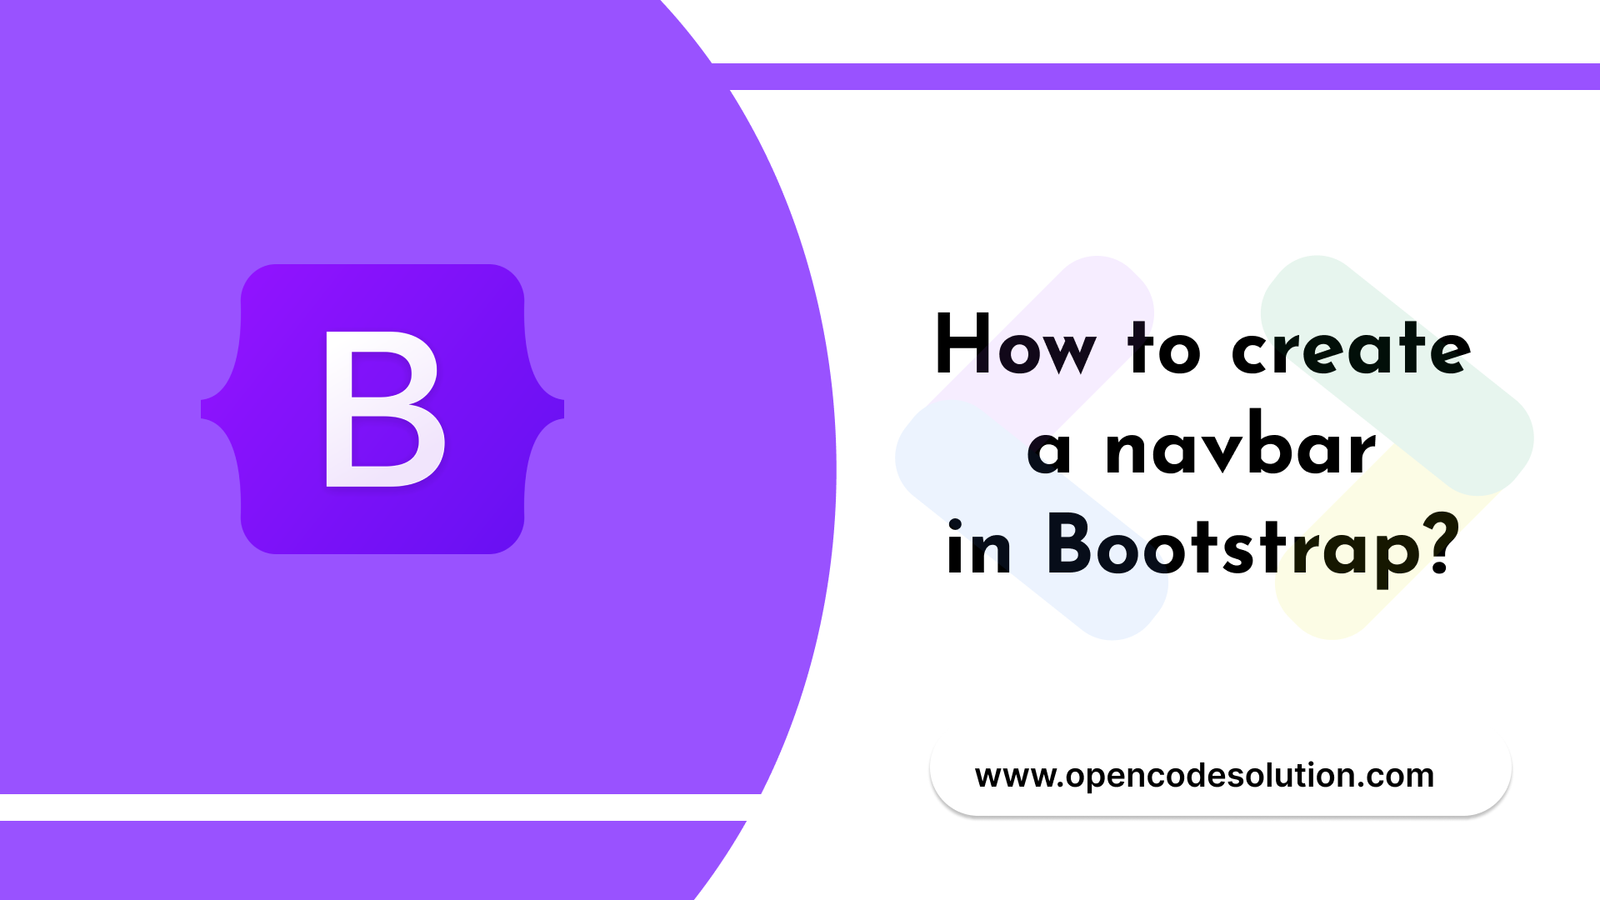 How to create a navbar in Bootstrap?